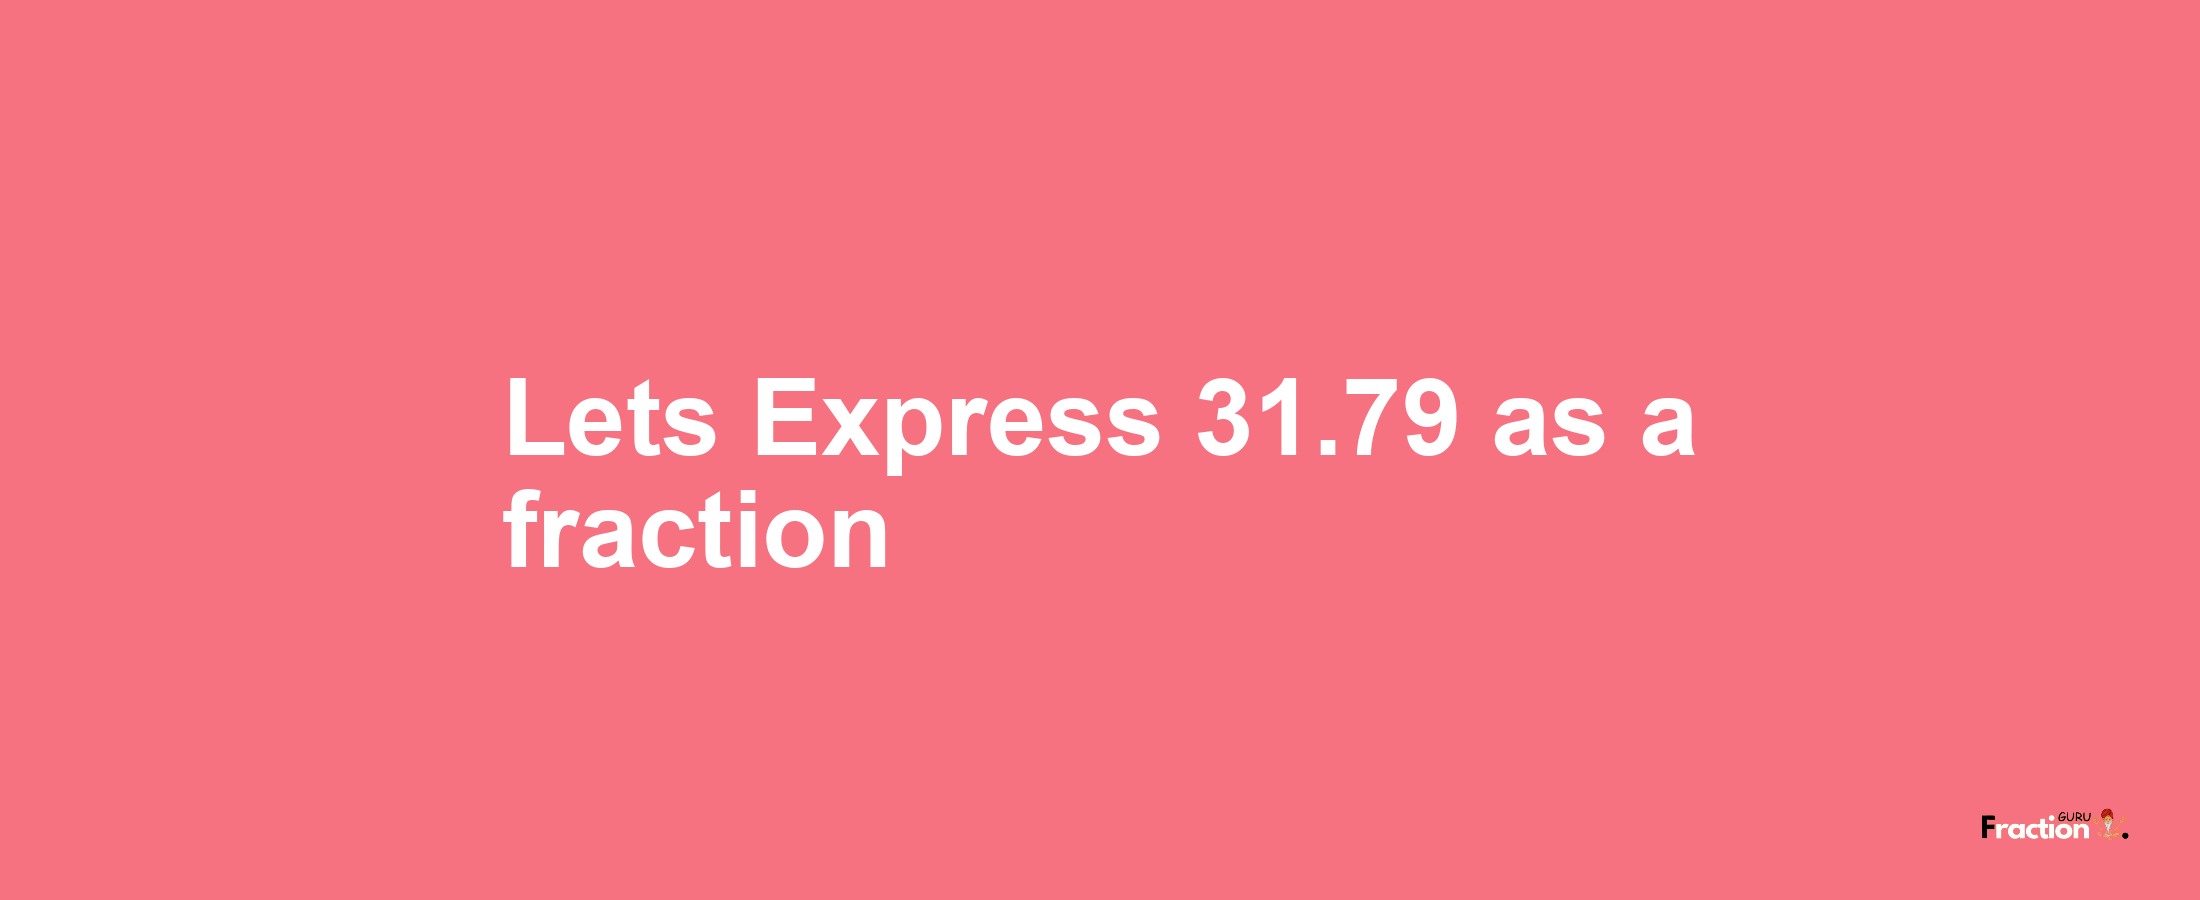 Lets Express 31.79 as afraction